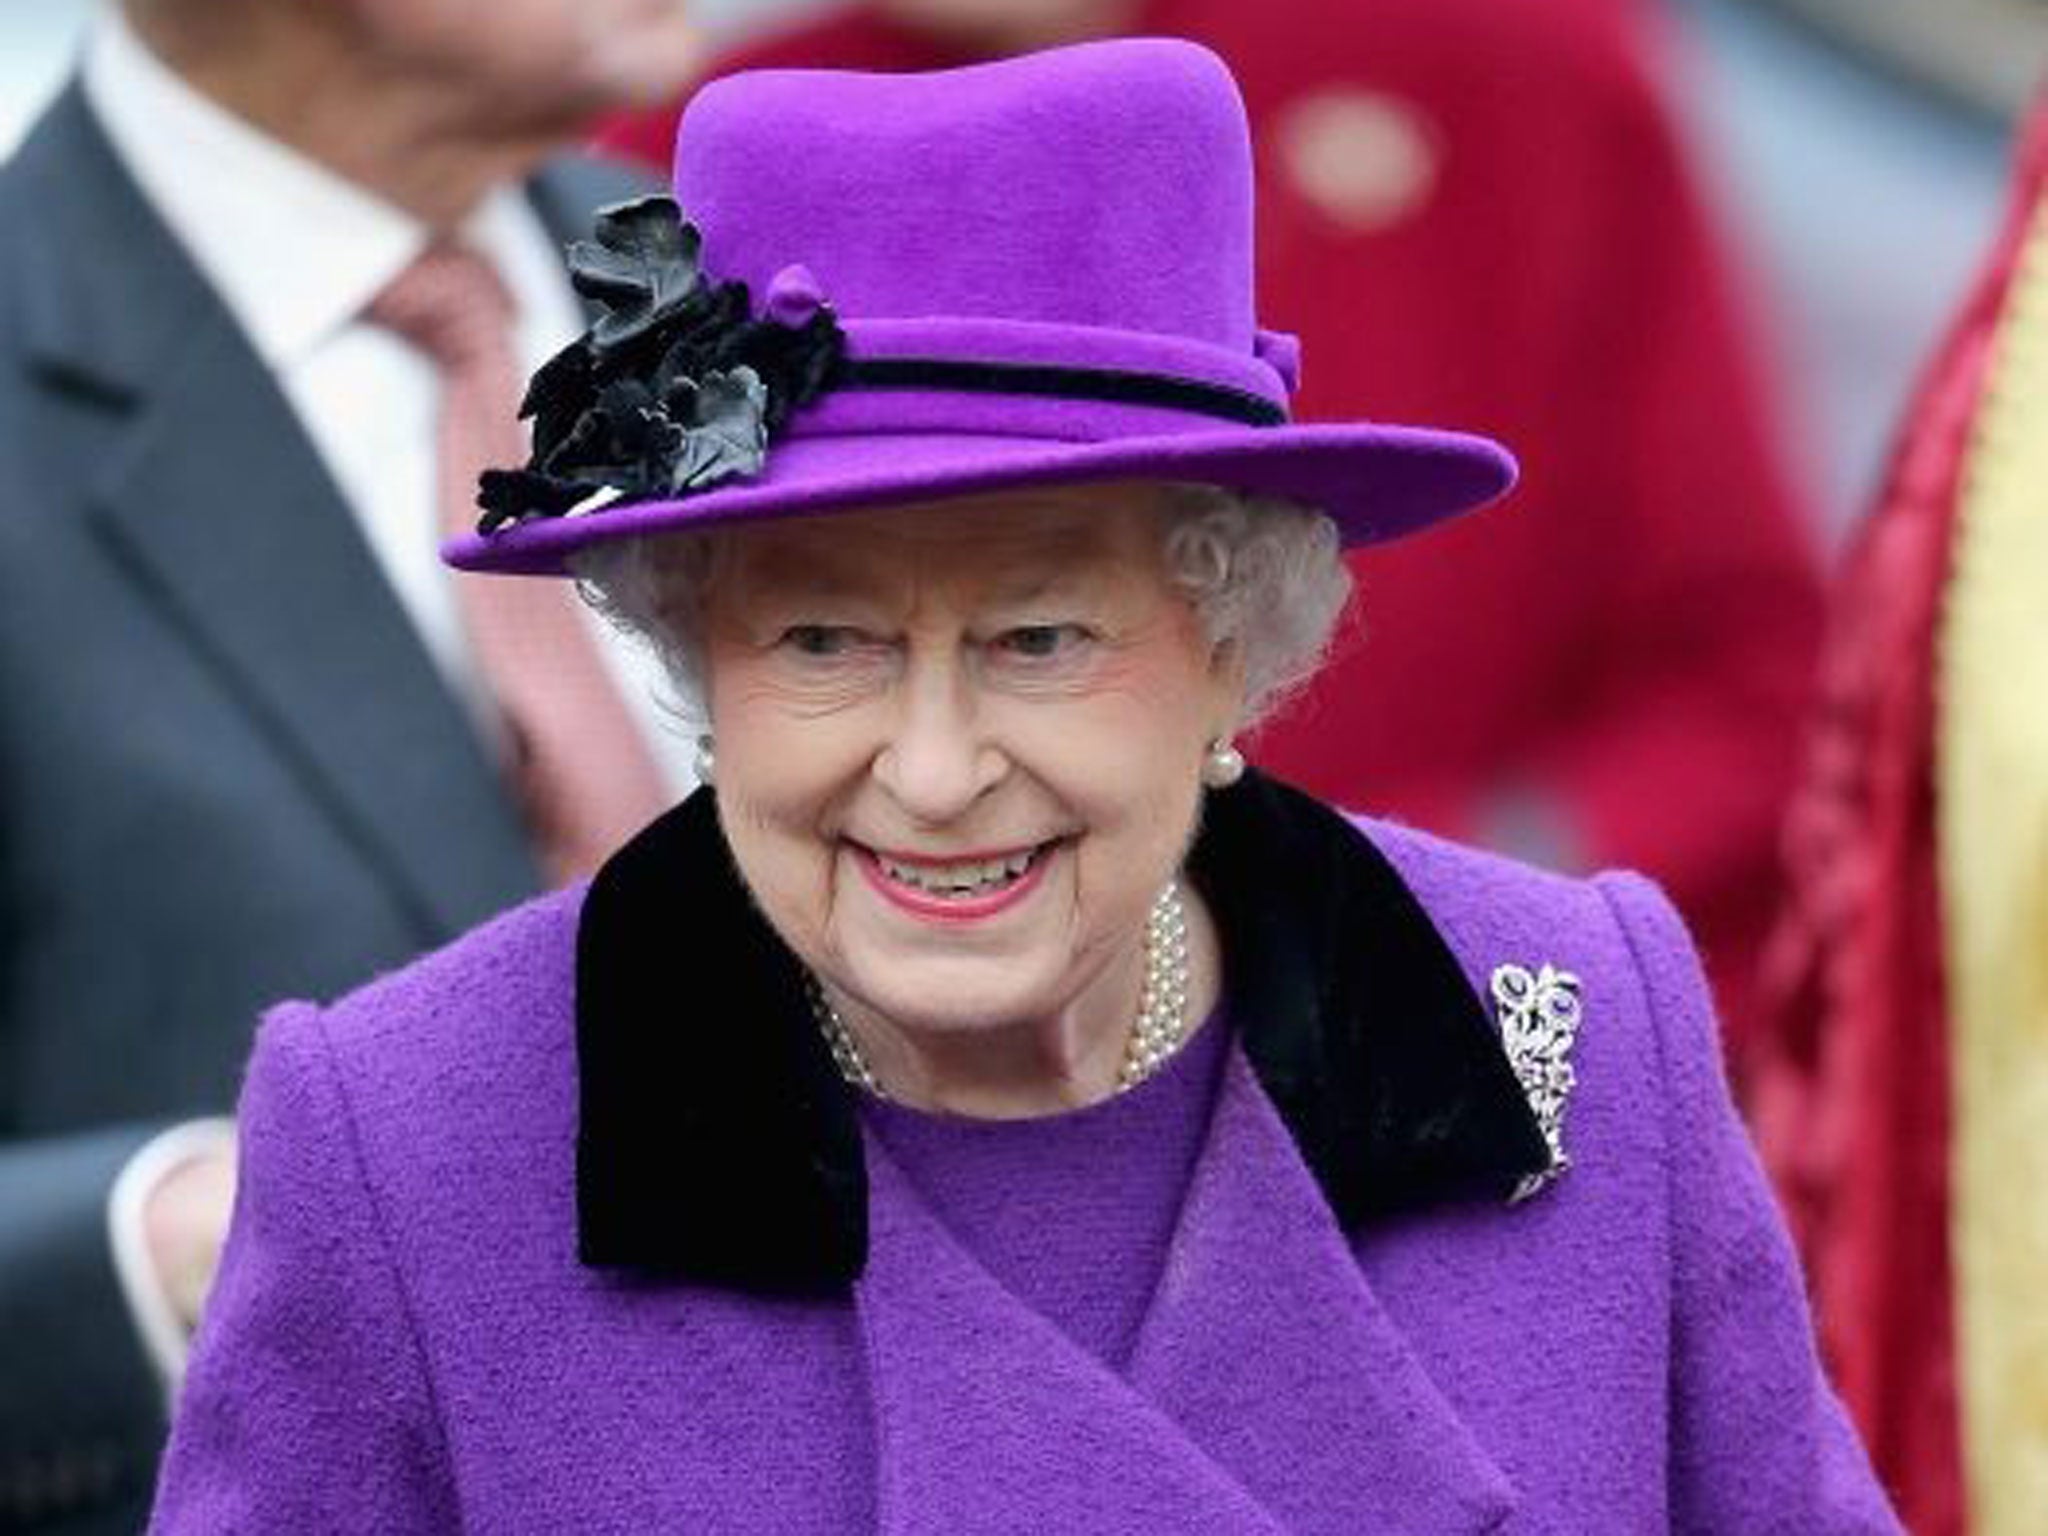 The Queen has never given an interview in her entire life in the public eye